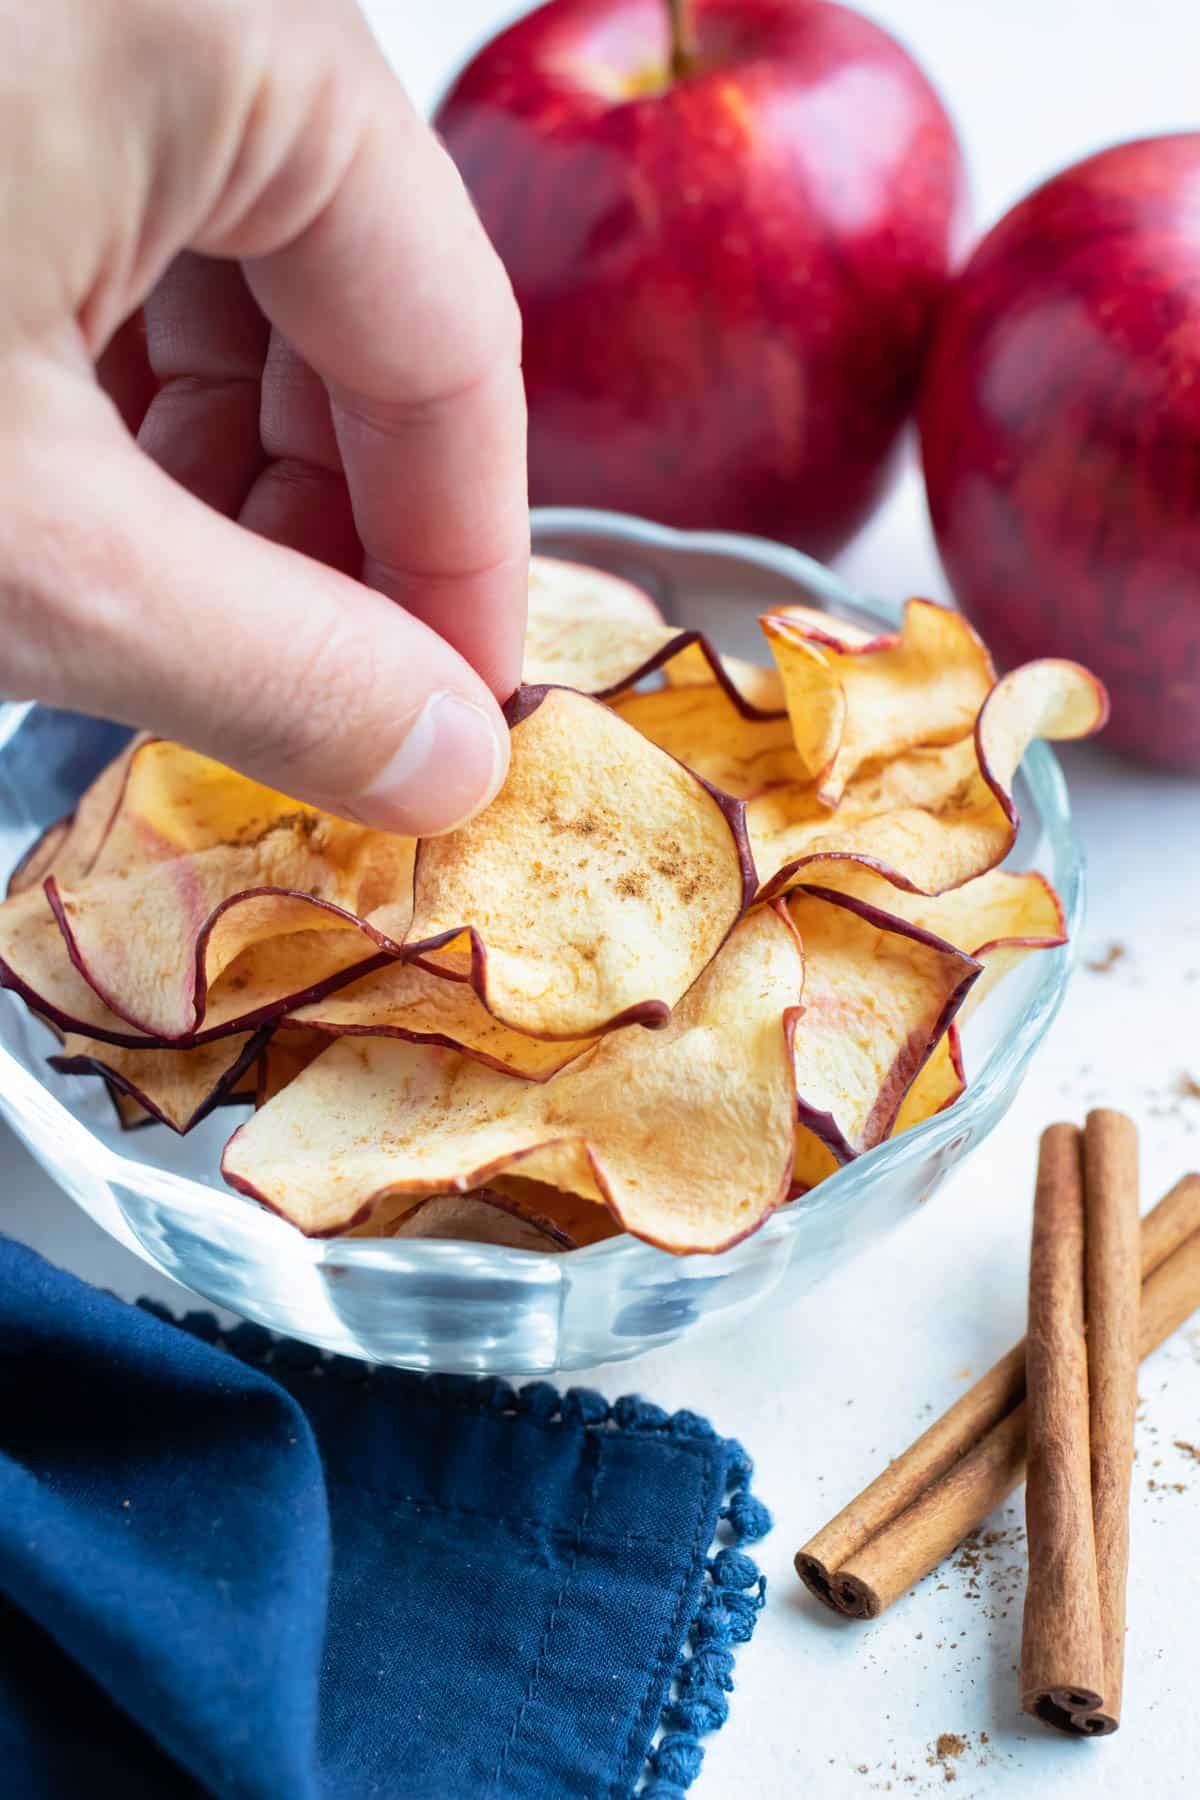 A bowl of apple chips is enjoyed for a healthy snack.